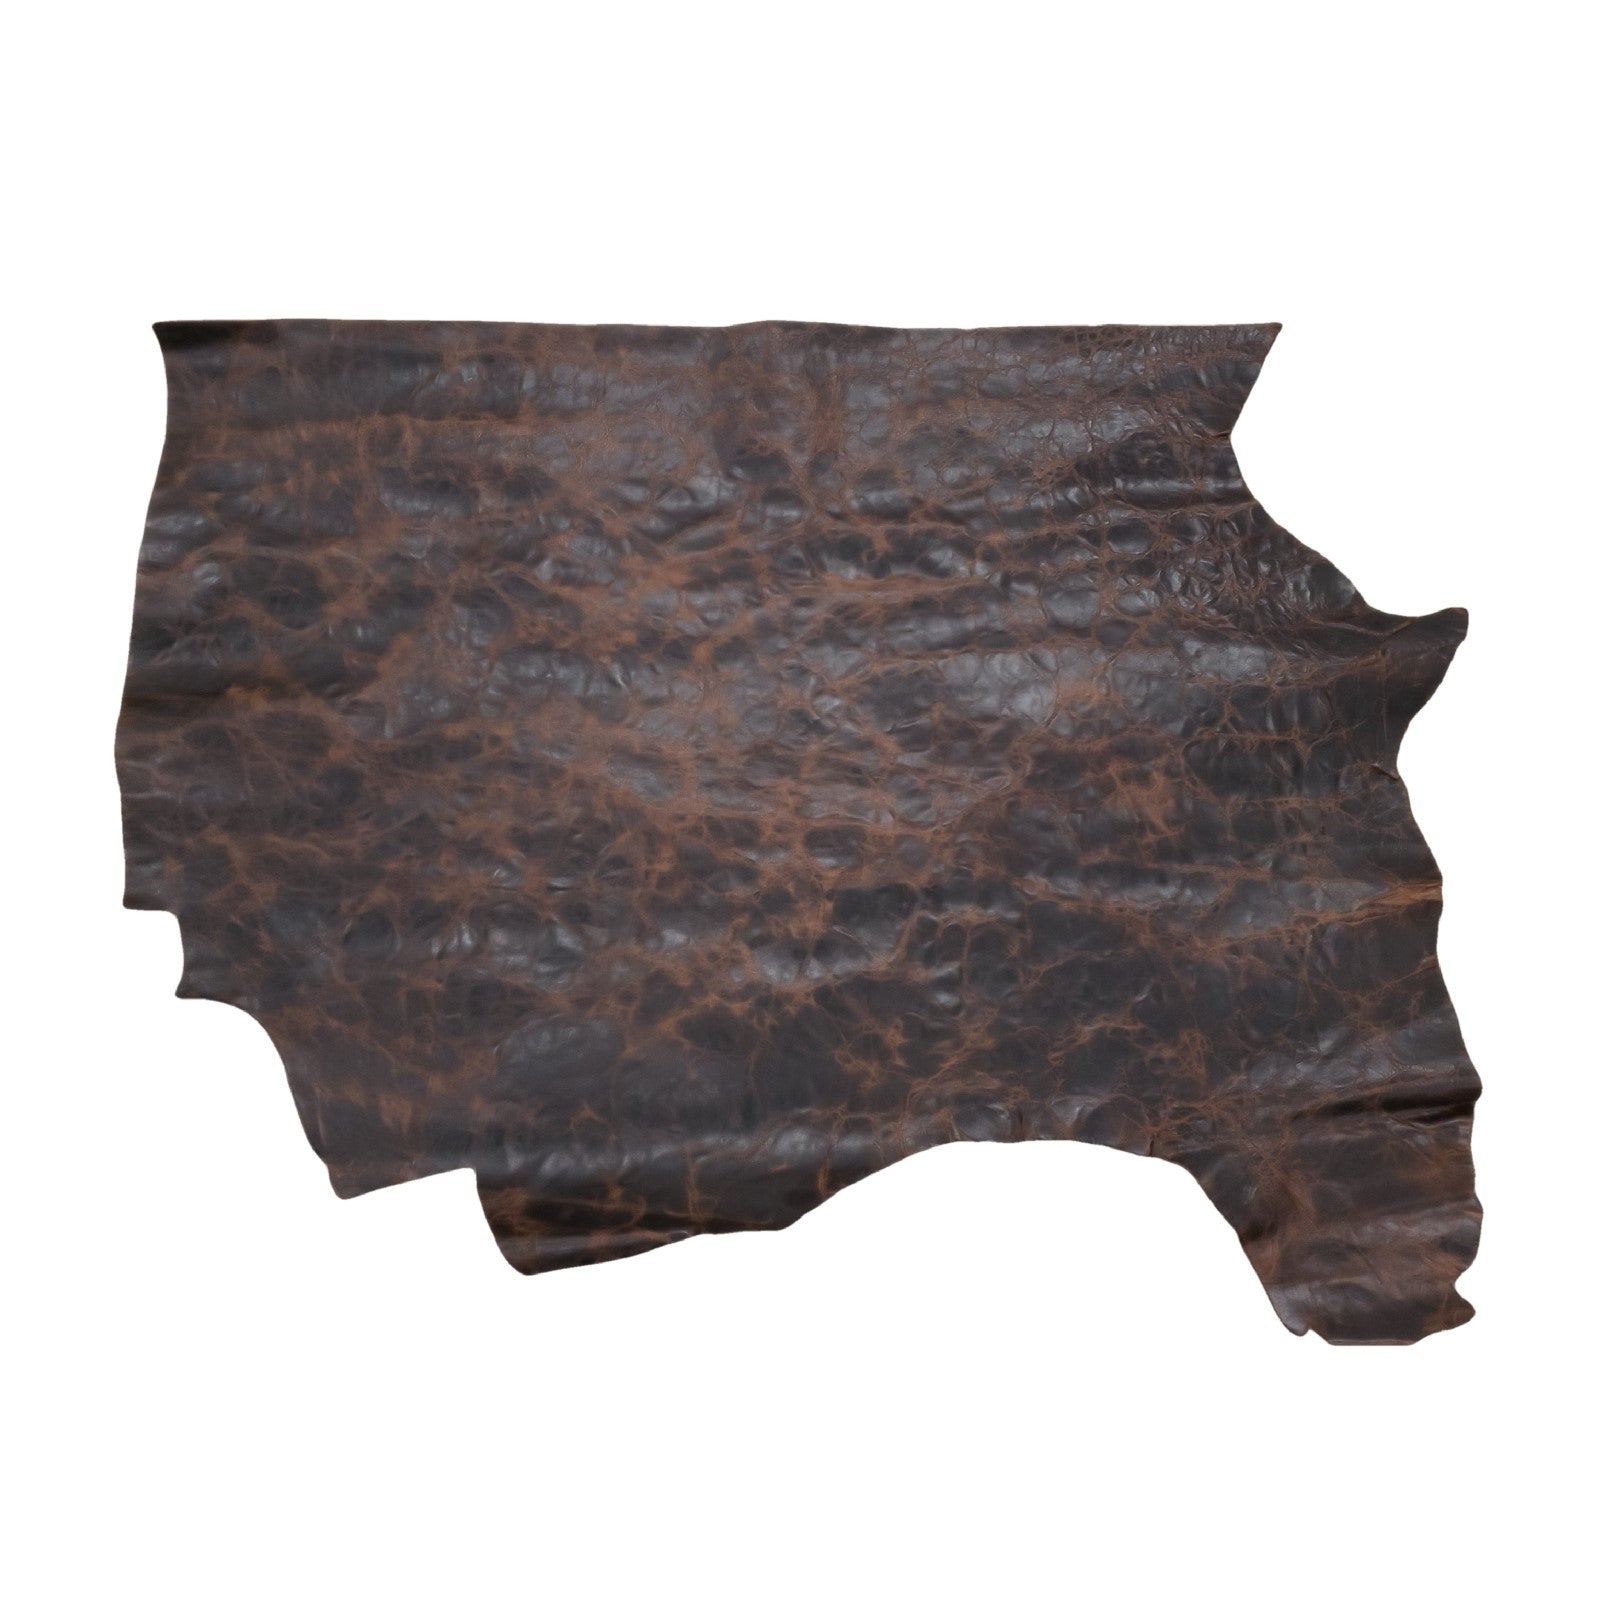 Horseback Brown, 6.5-26 SqFt, 3-4 oz, Cow Sides & Pieces, Longhorn, 6.5-7.5 / Project Piece (Bottom) | The Leather Guy